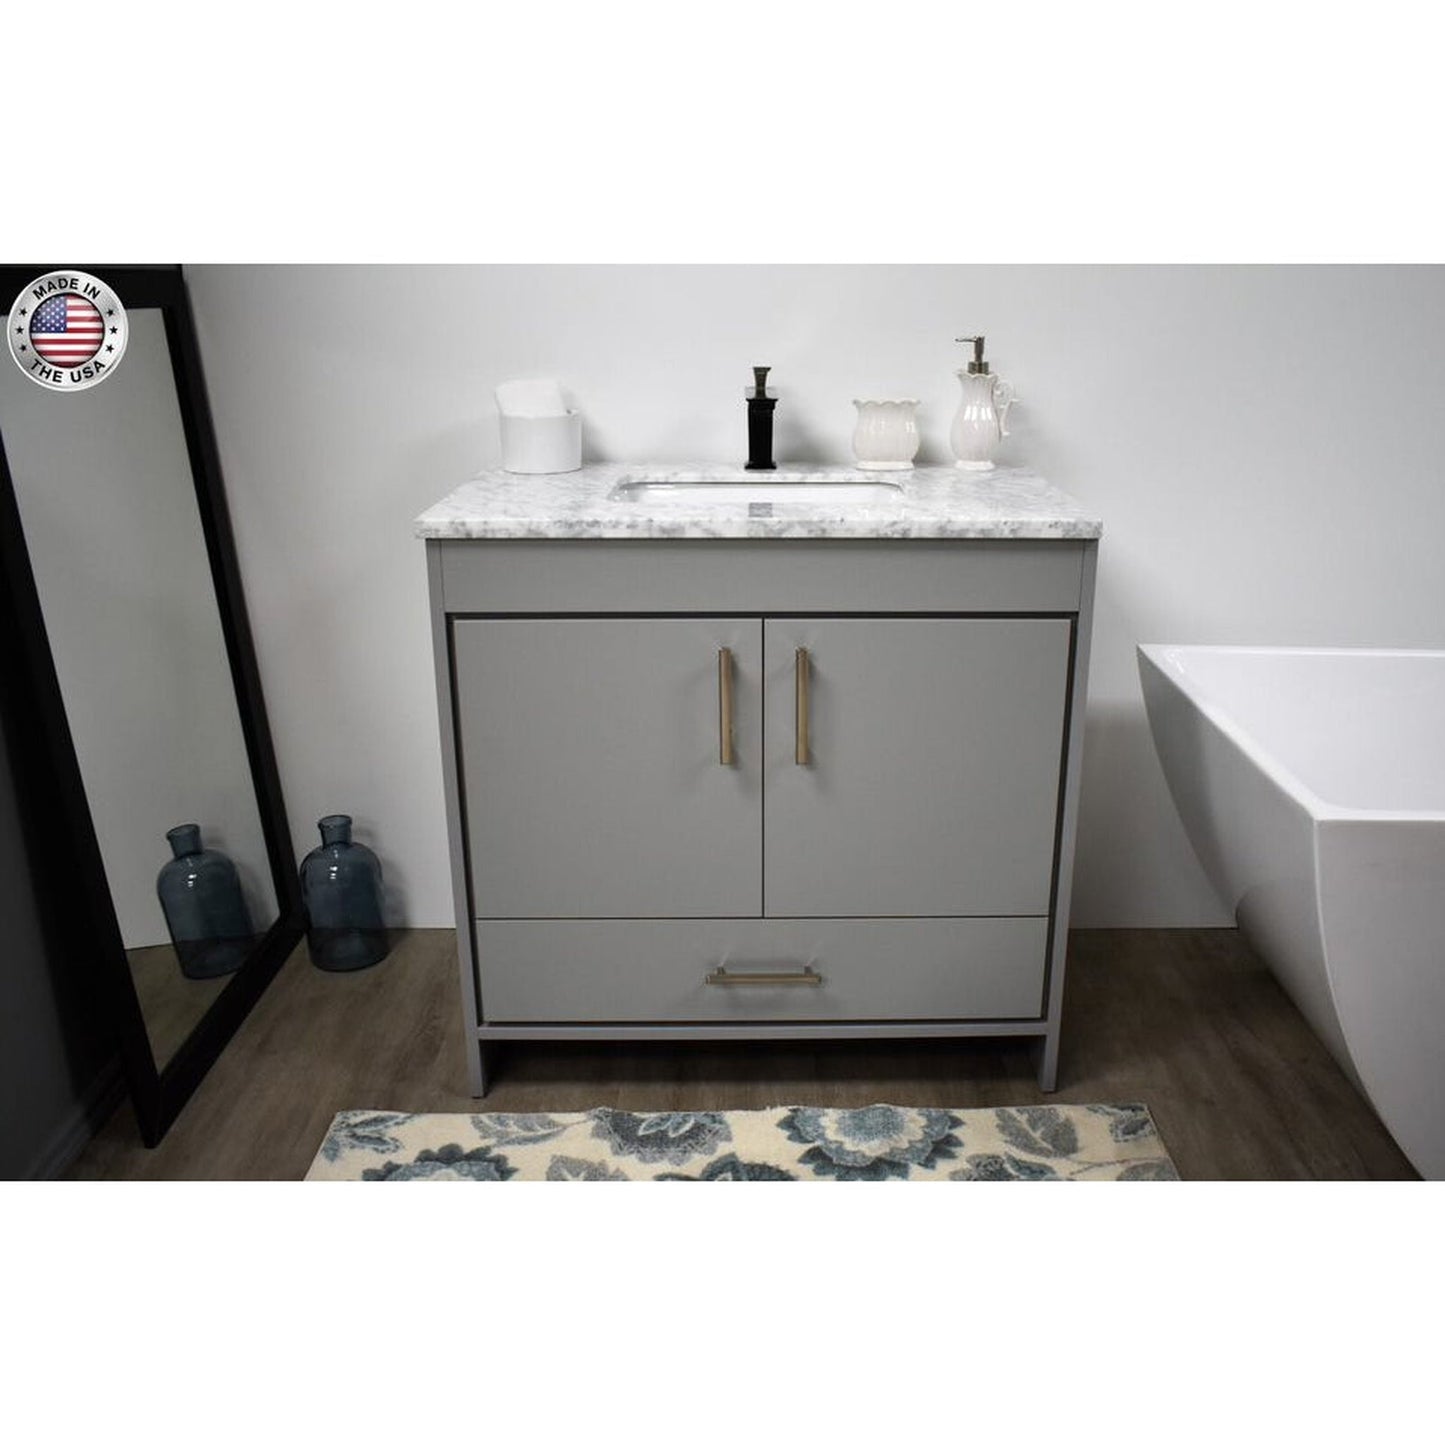 Volpa USA Capri 36" x 22" Gray Freestanding Modern Bathroom Vanity With Preinstalled Undermount Sink And Carrara Marble top With Brushed Nickel Edge Handles